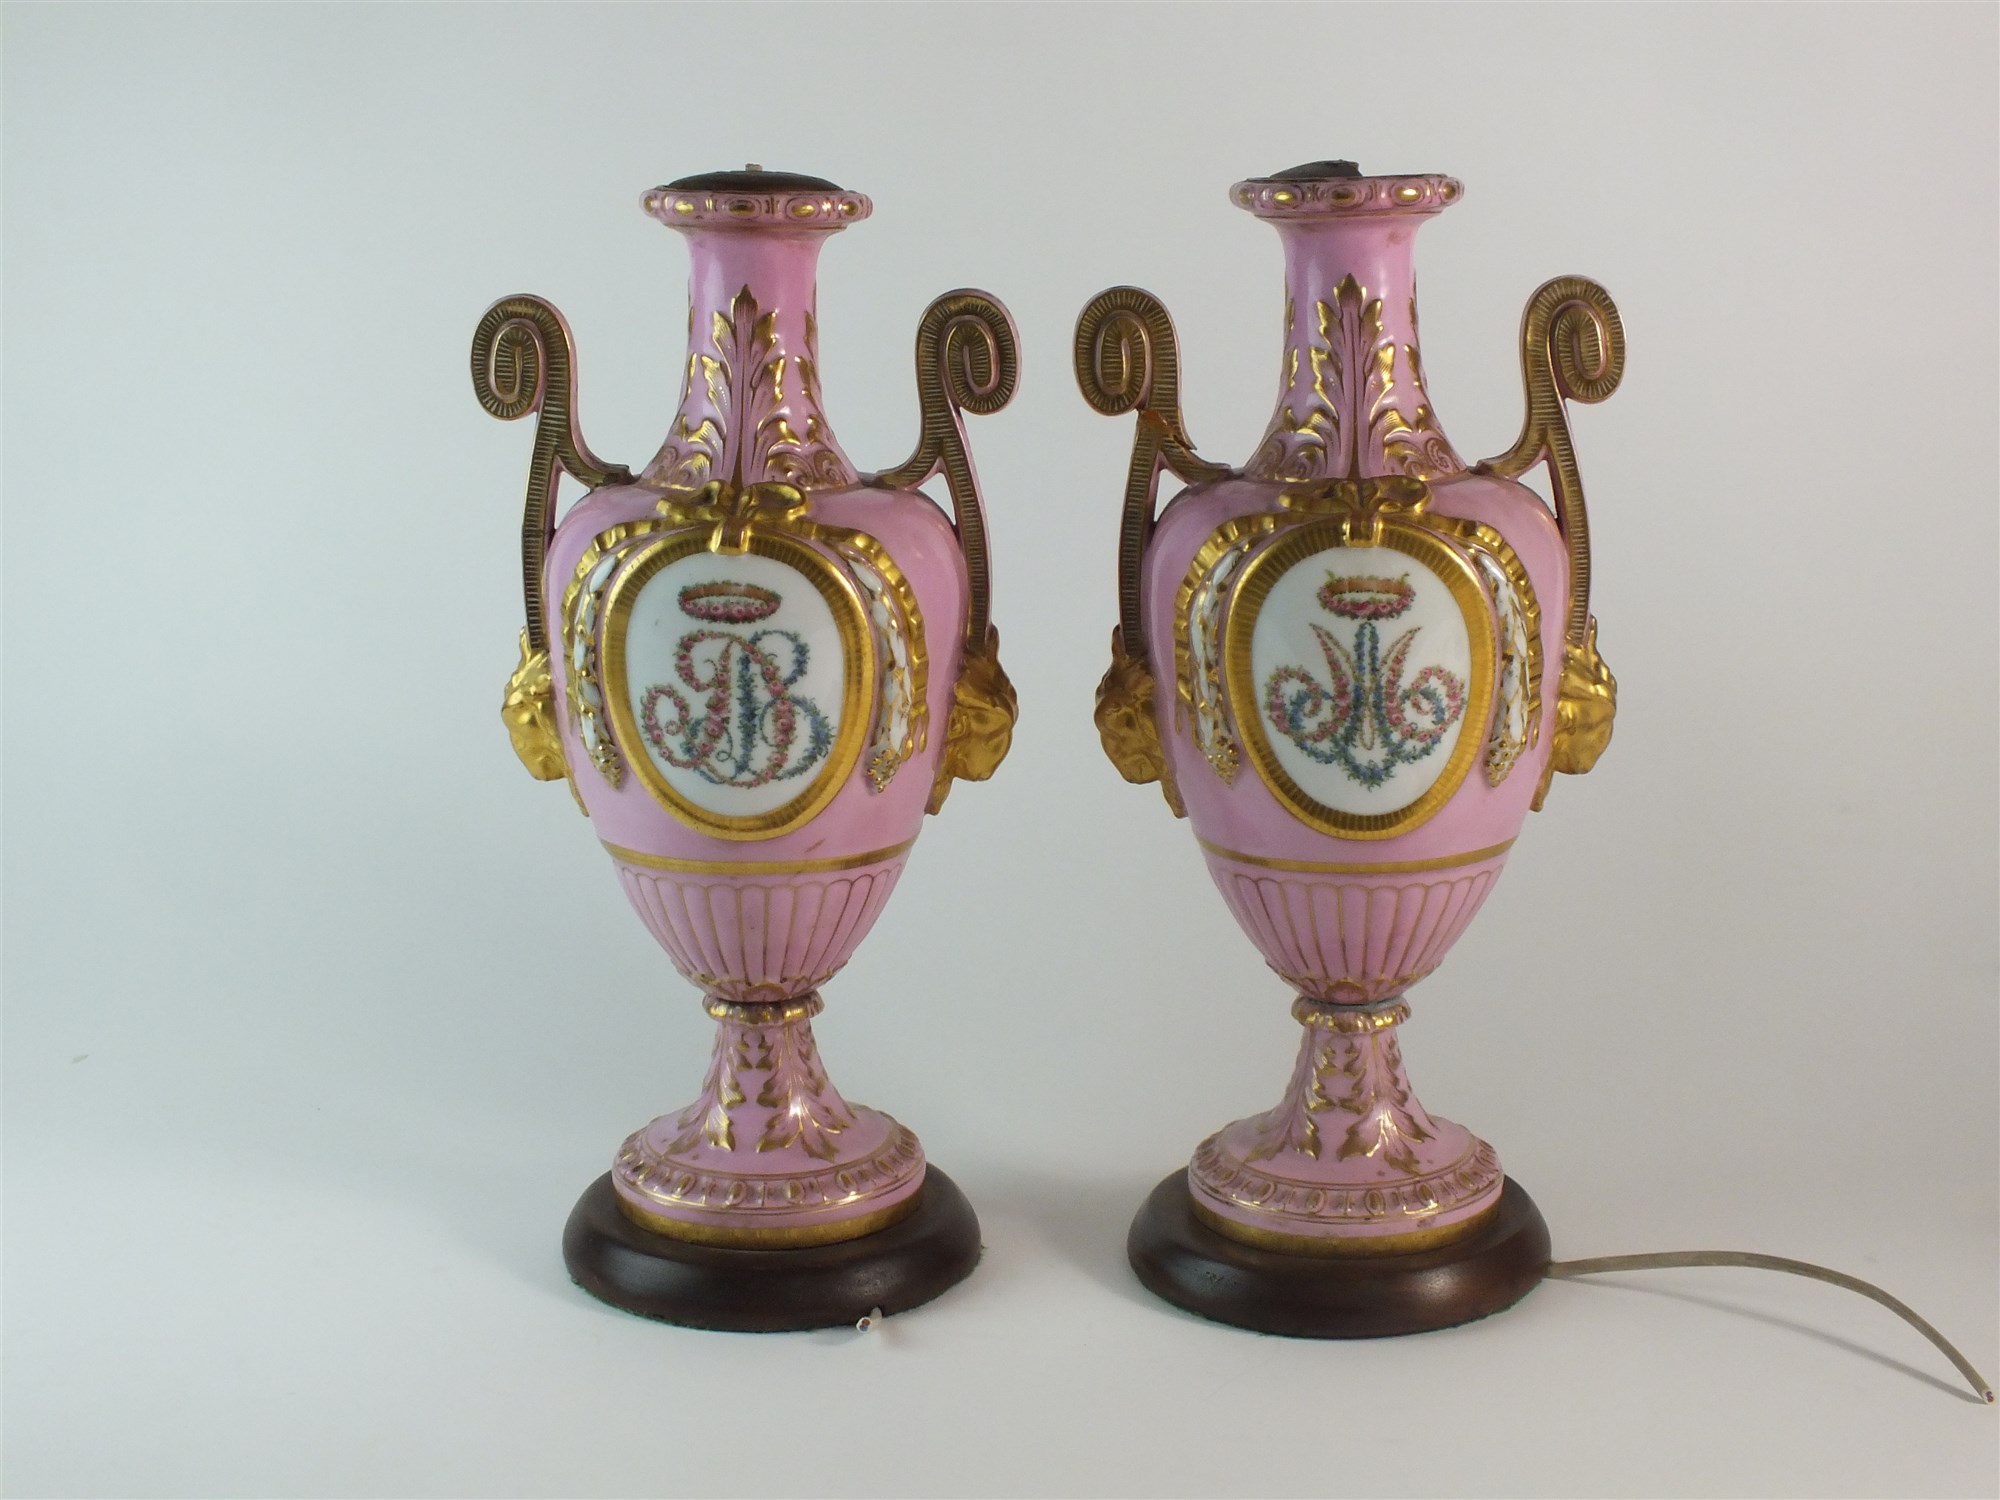 A pair of French porcelain vases converted to lamps - Image 2 of 2